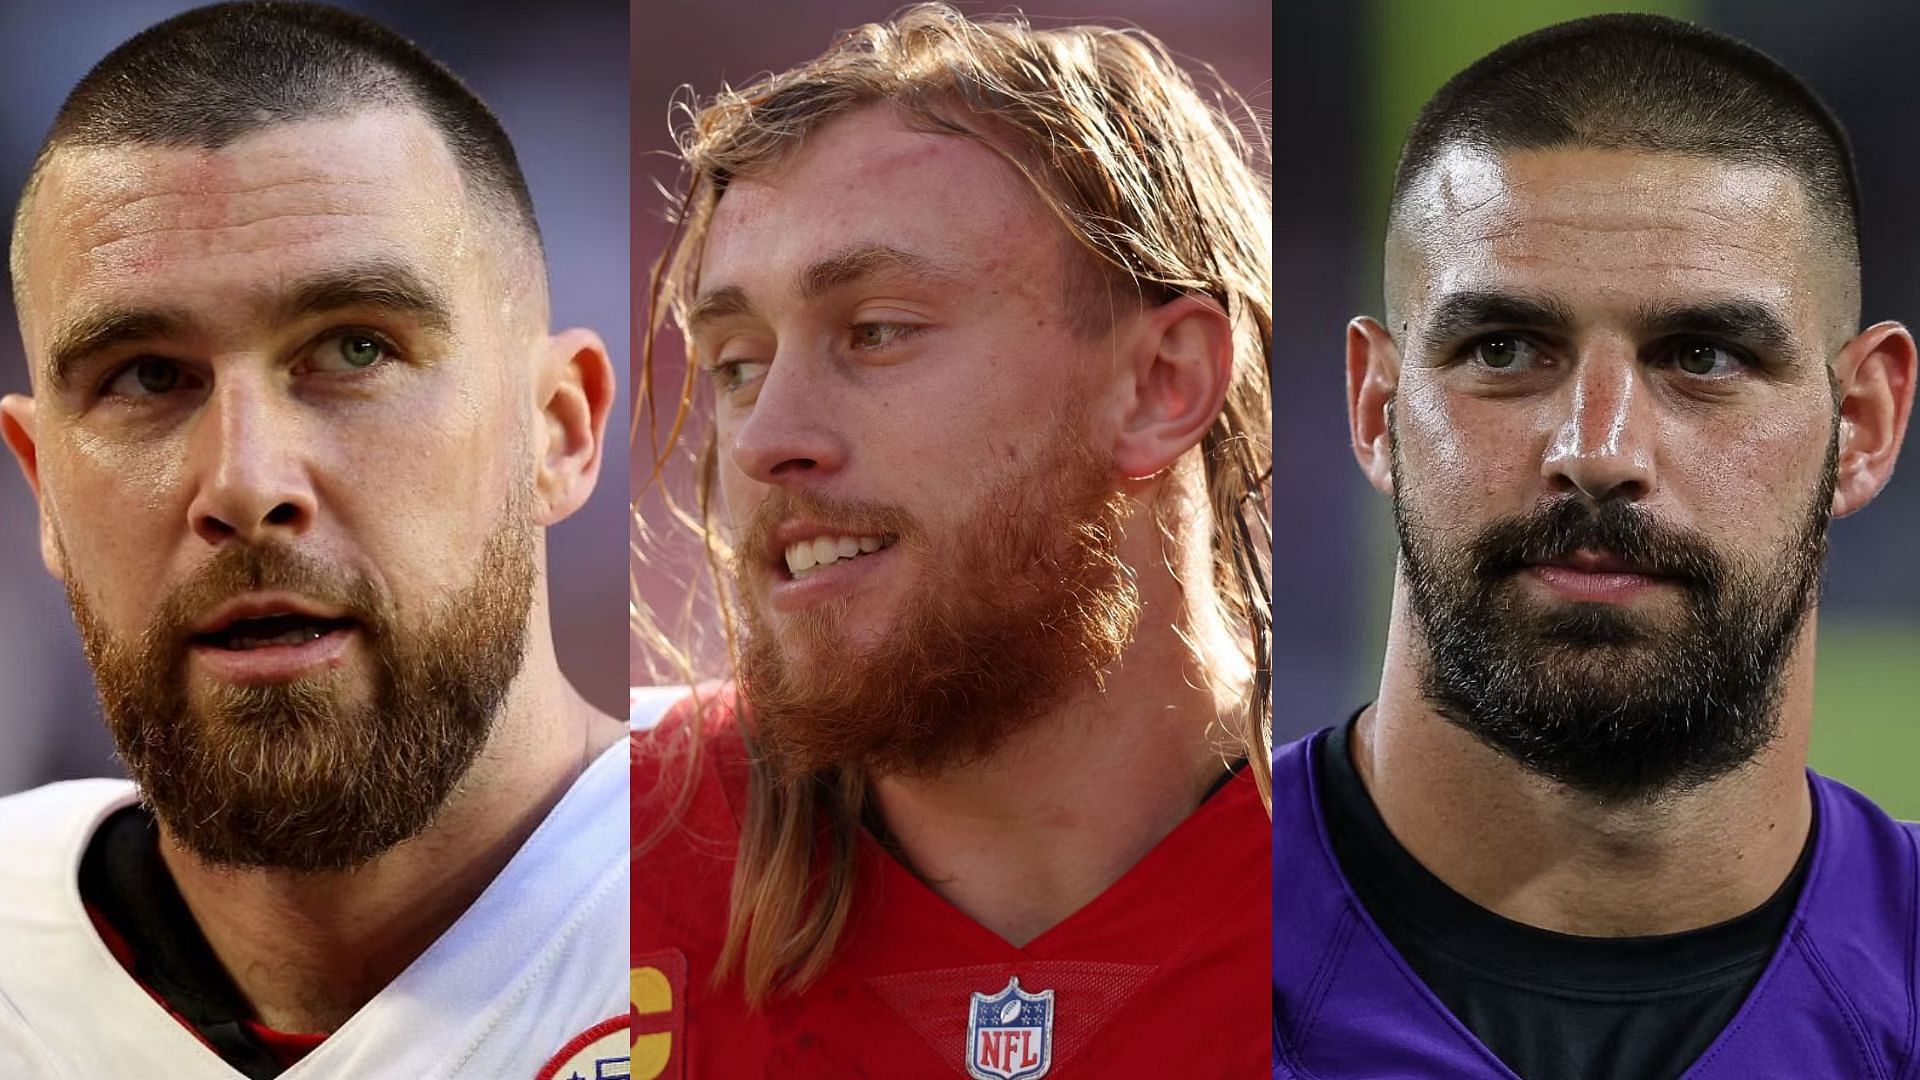 NFL tight ends Travis Kelce, George Kittle, and Mark Andrews